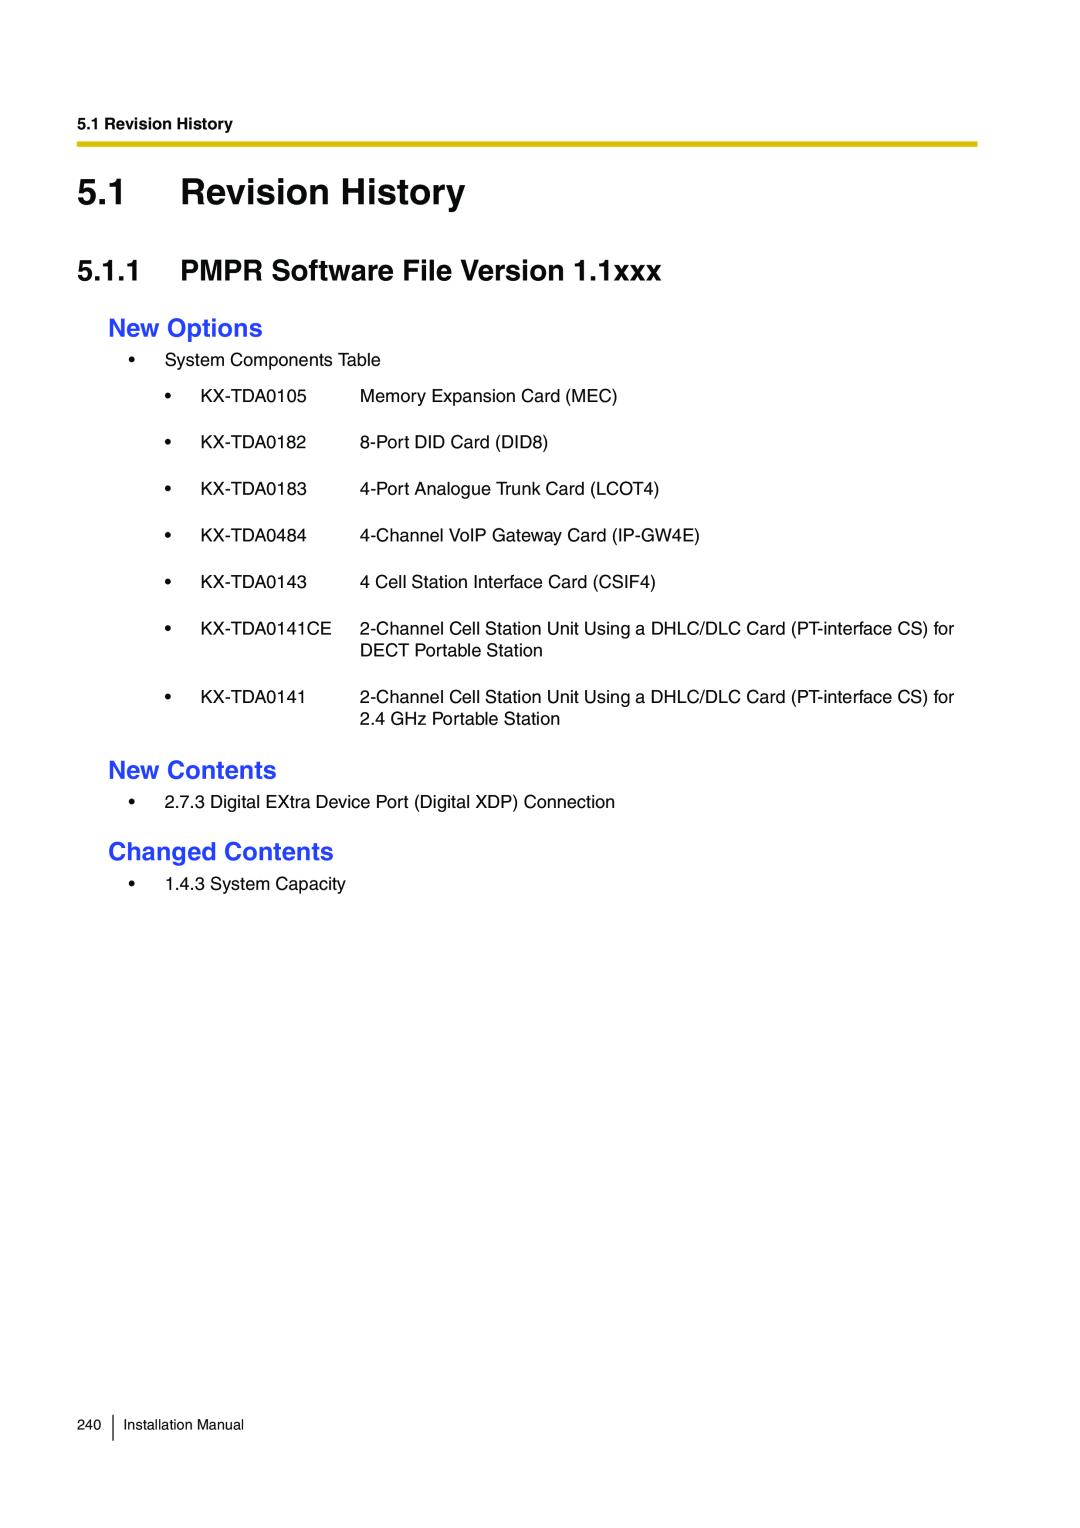 Panasonic KX-TDA100 Revision History, PMPR Software File Version, New Options, New Contents, Changed Contents 